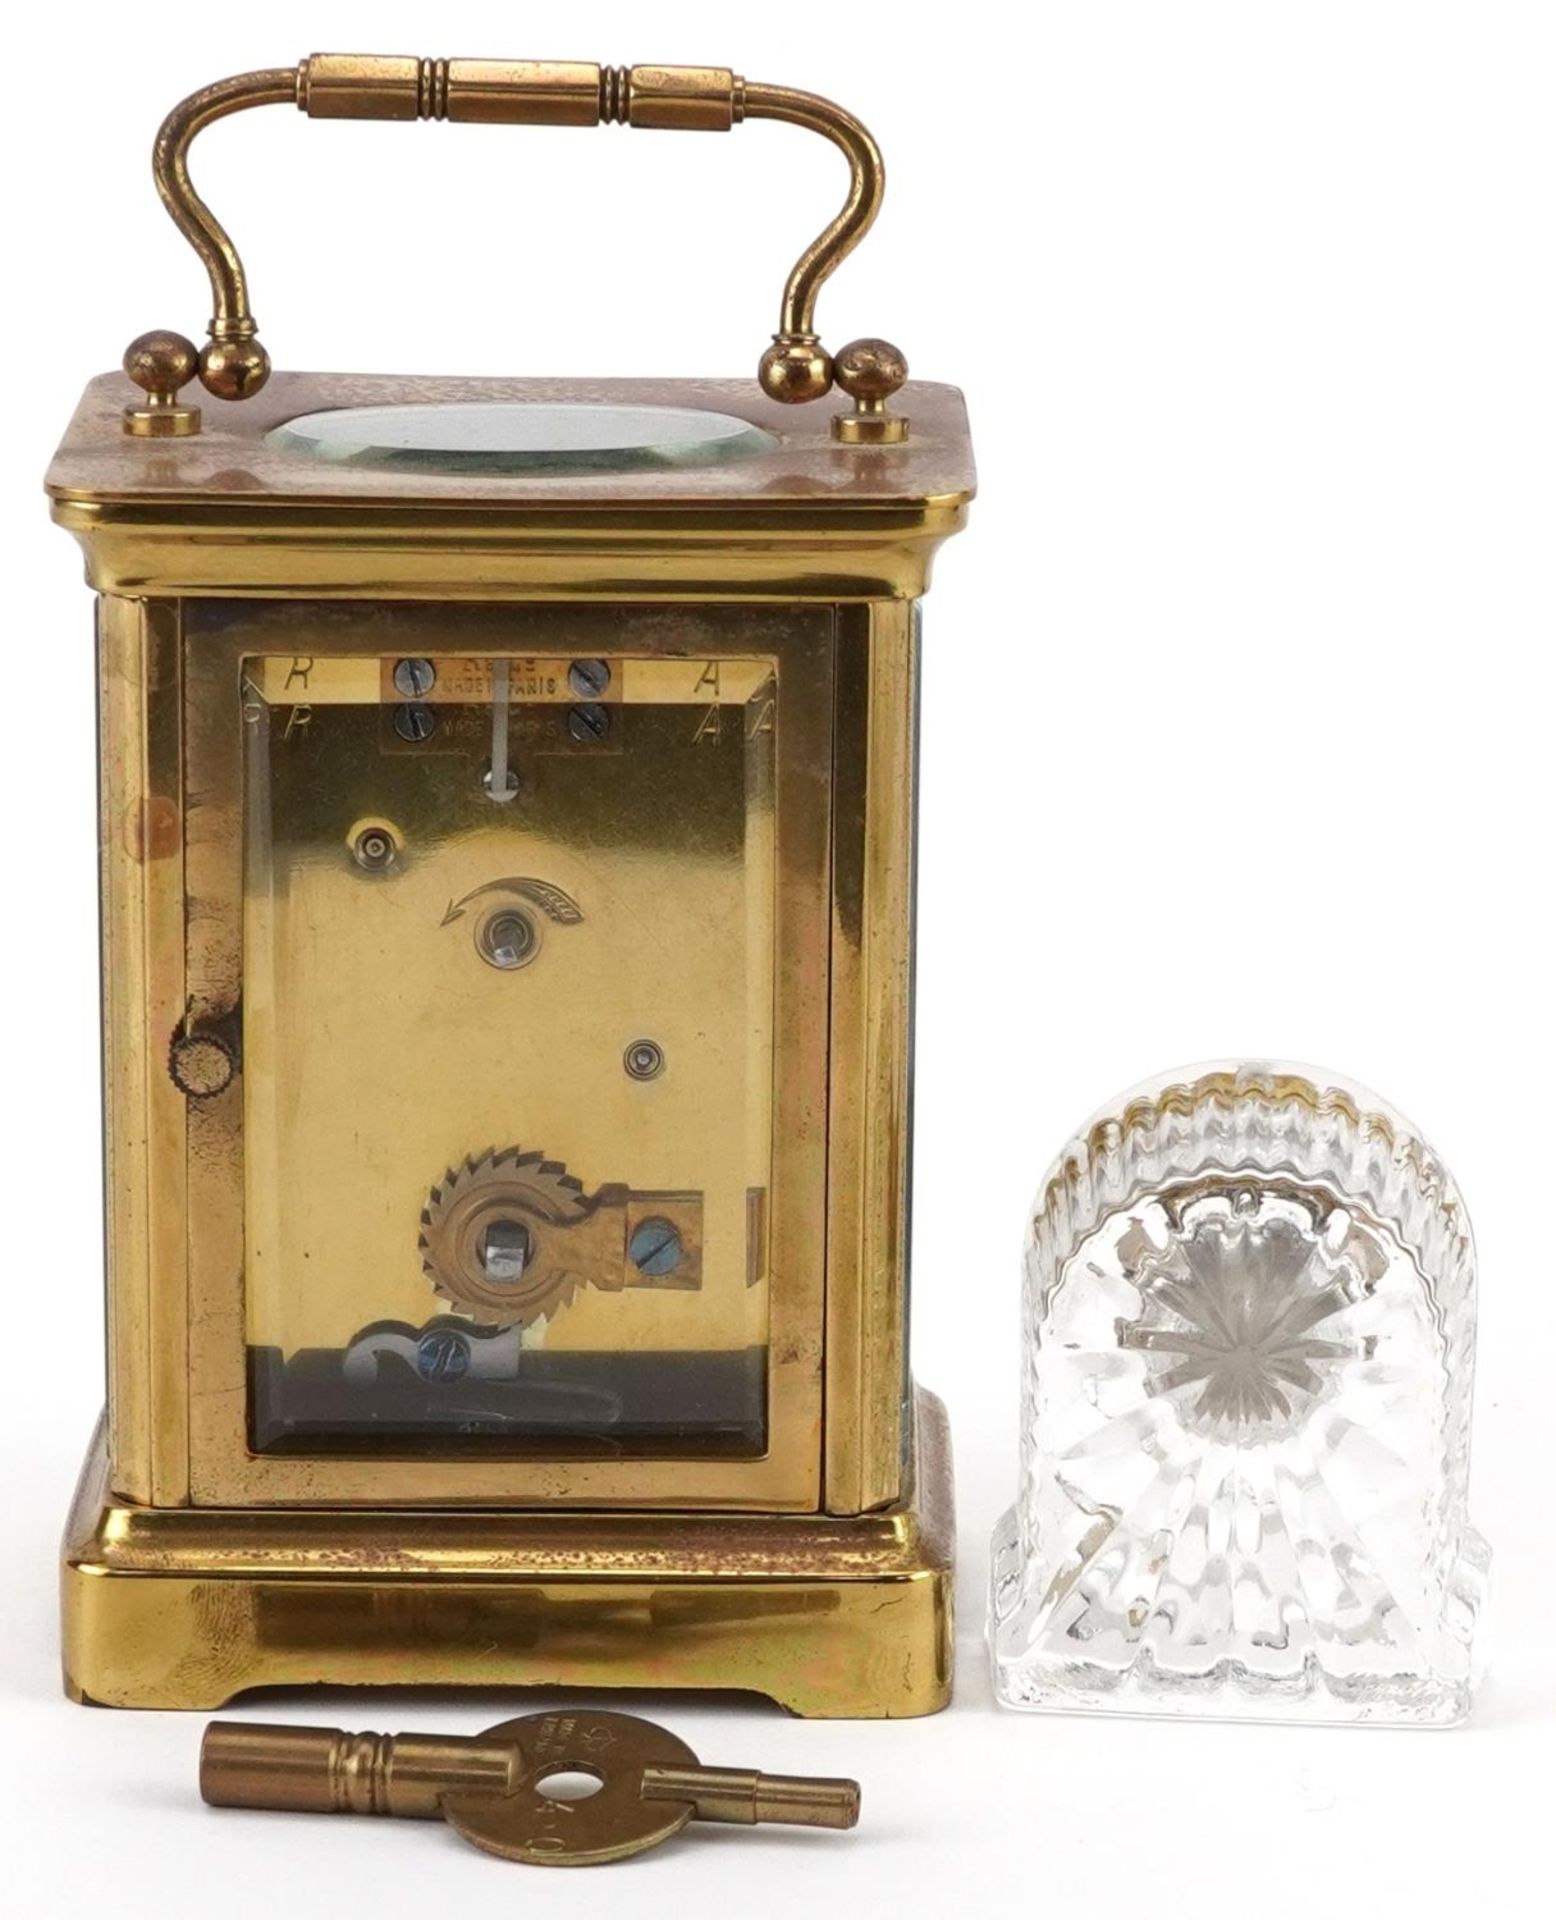 French brass cased carriage clock with enamelled dial having Roman numerals and an Edinburgh Crystal - Image 2 of 5